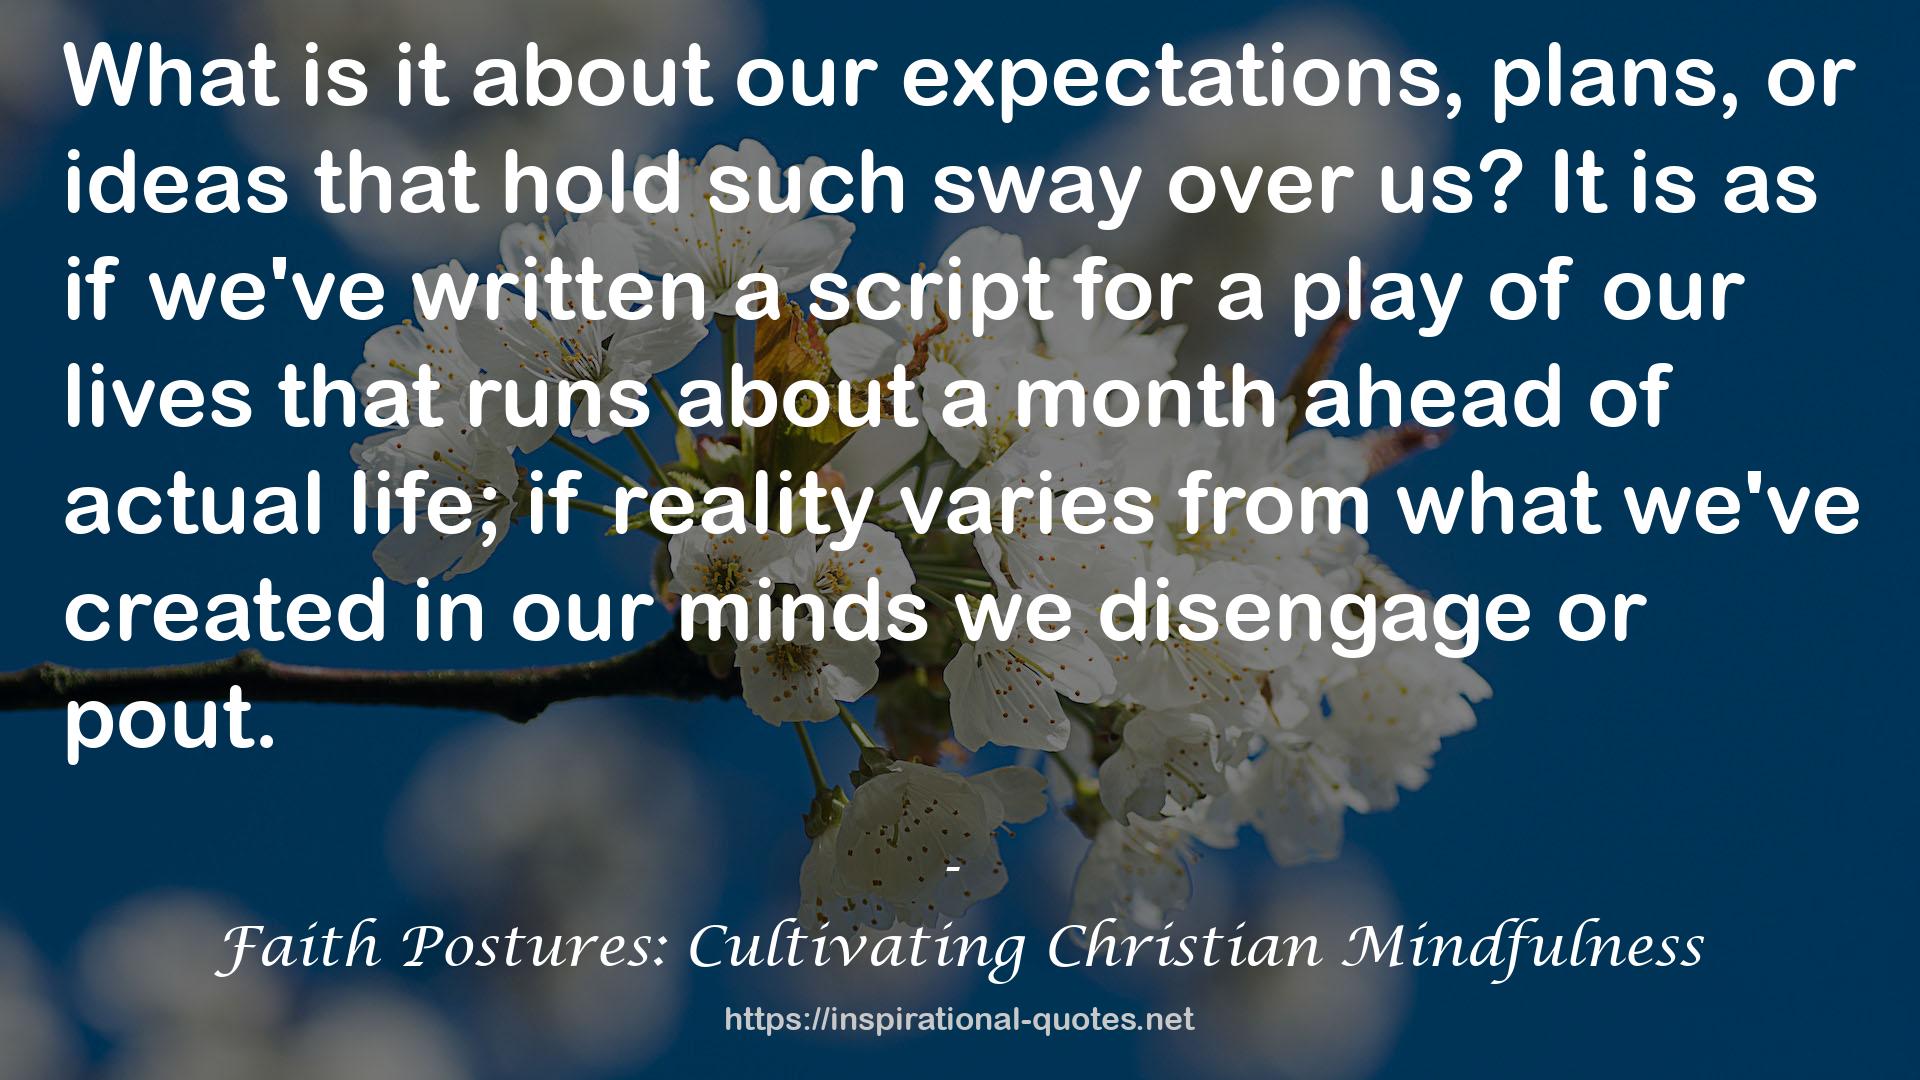 Faith Postures: Cultivating Christian Mindfulness QUOTES